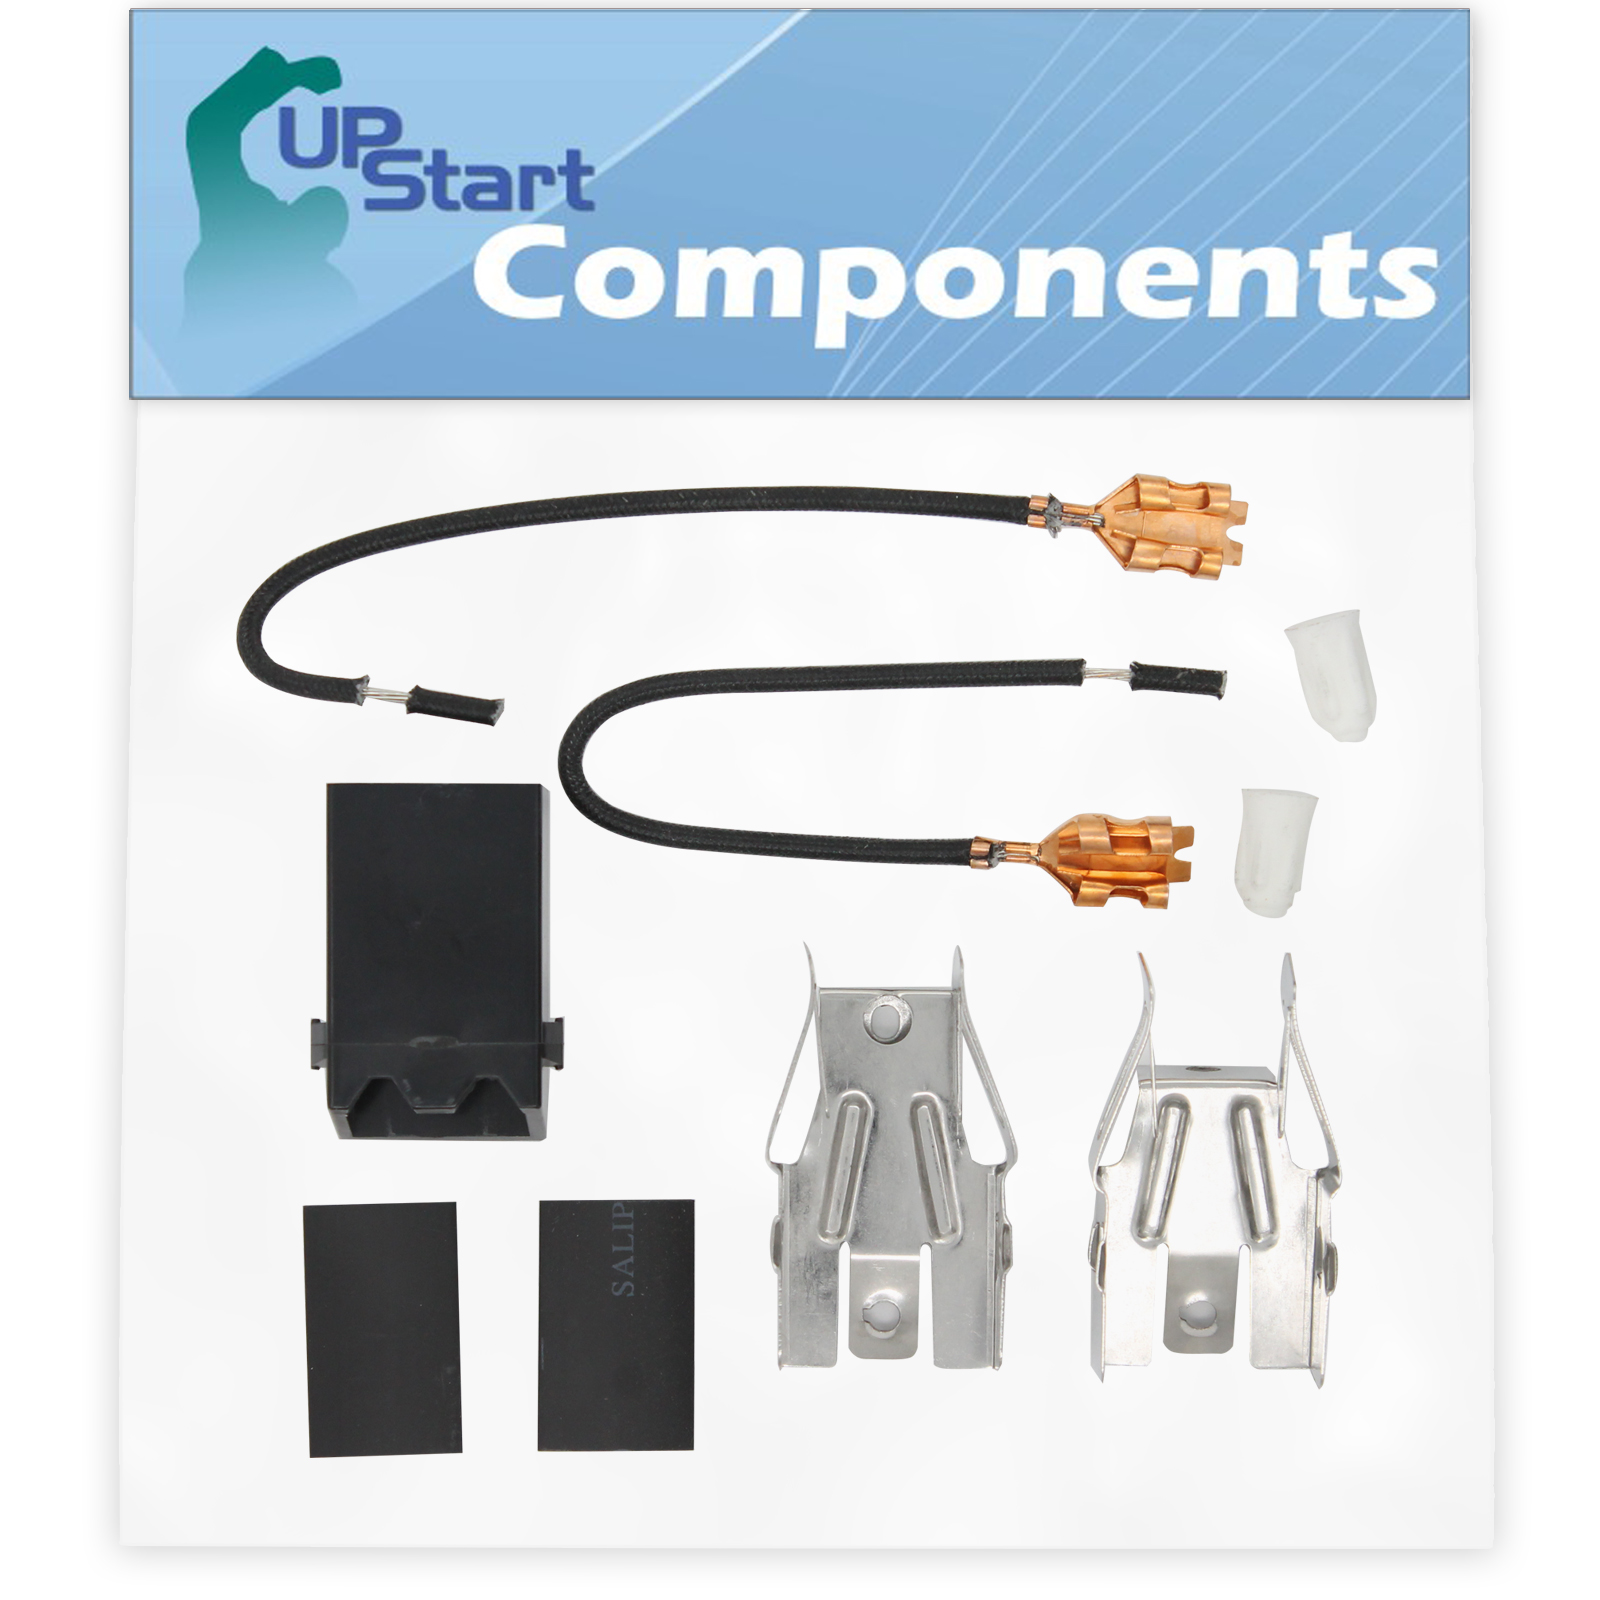 330031 Top Burner Receptacle Kit Replacement for Roper FES310YW1 Range/Cooktop/Oven - Compatible with 330031 Range Burner Receptacle Kit - UpStart Components Brand - image 1 of 4